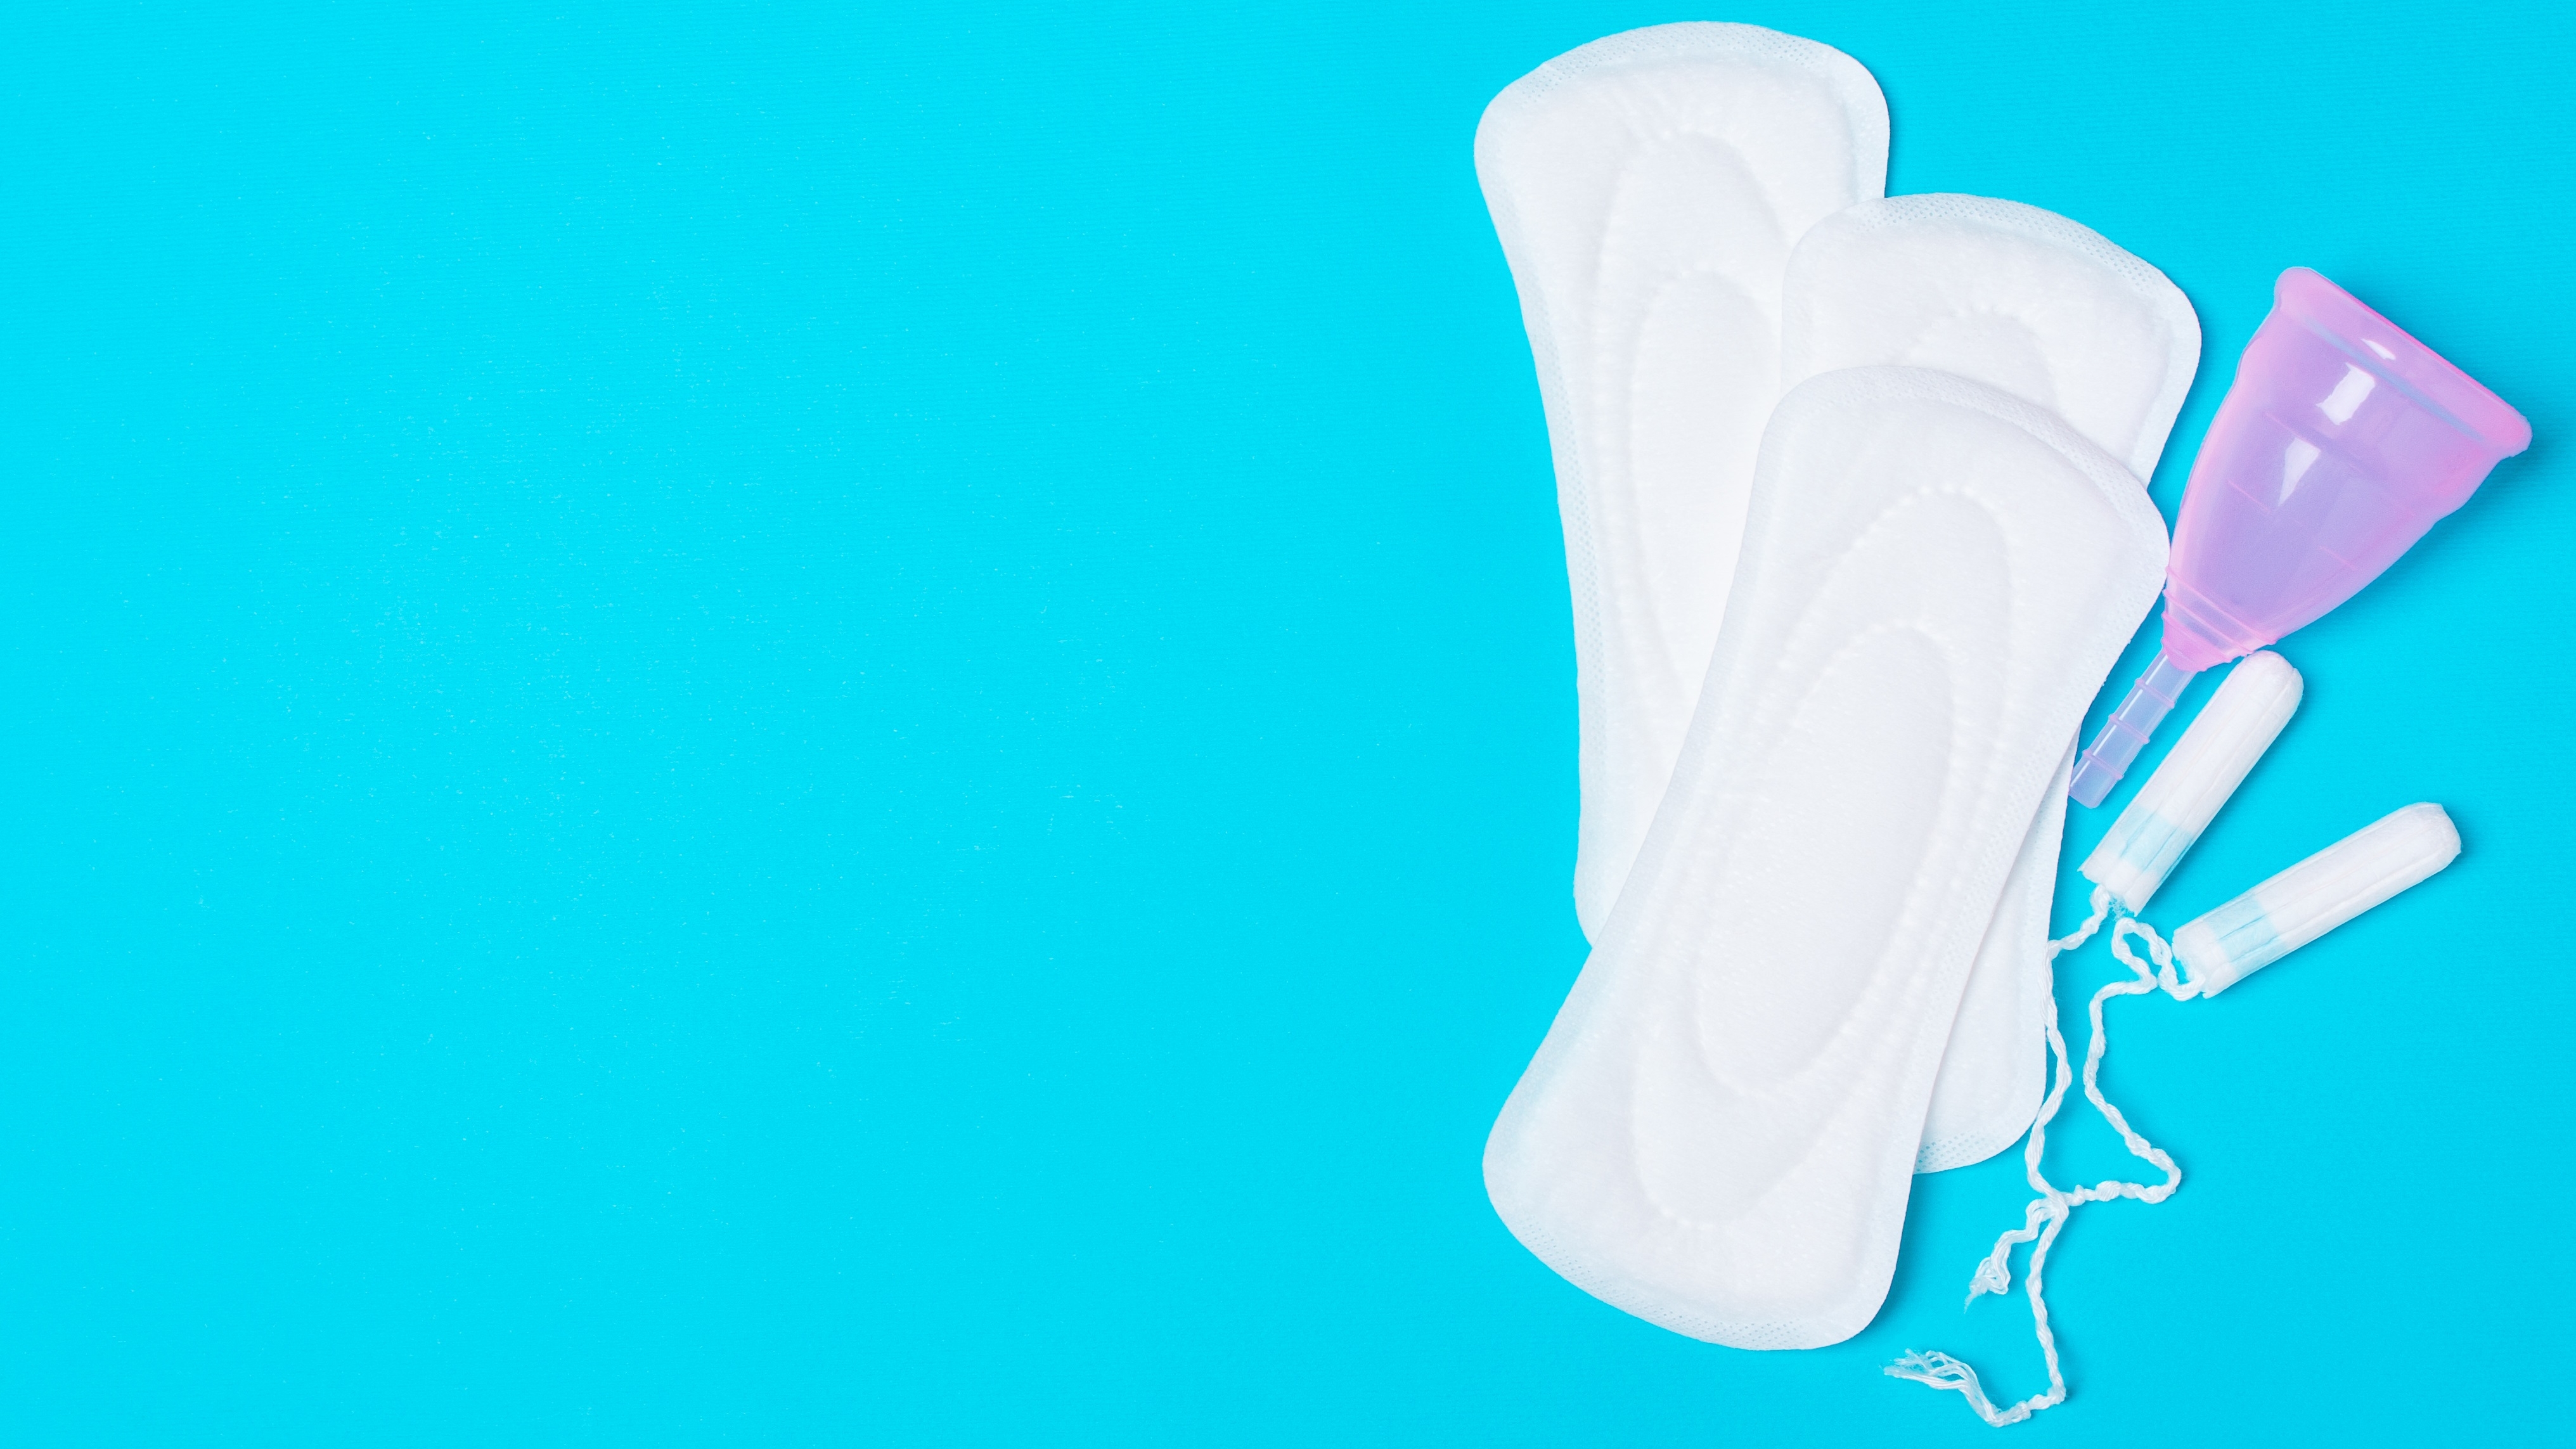 Cheap period products: save money on tampons, pads & reusable